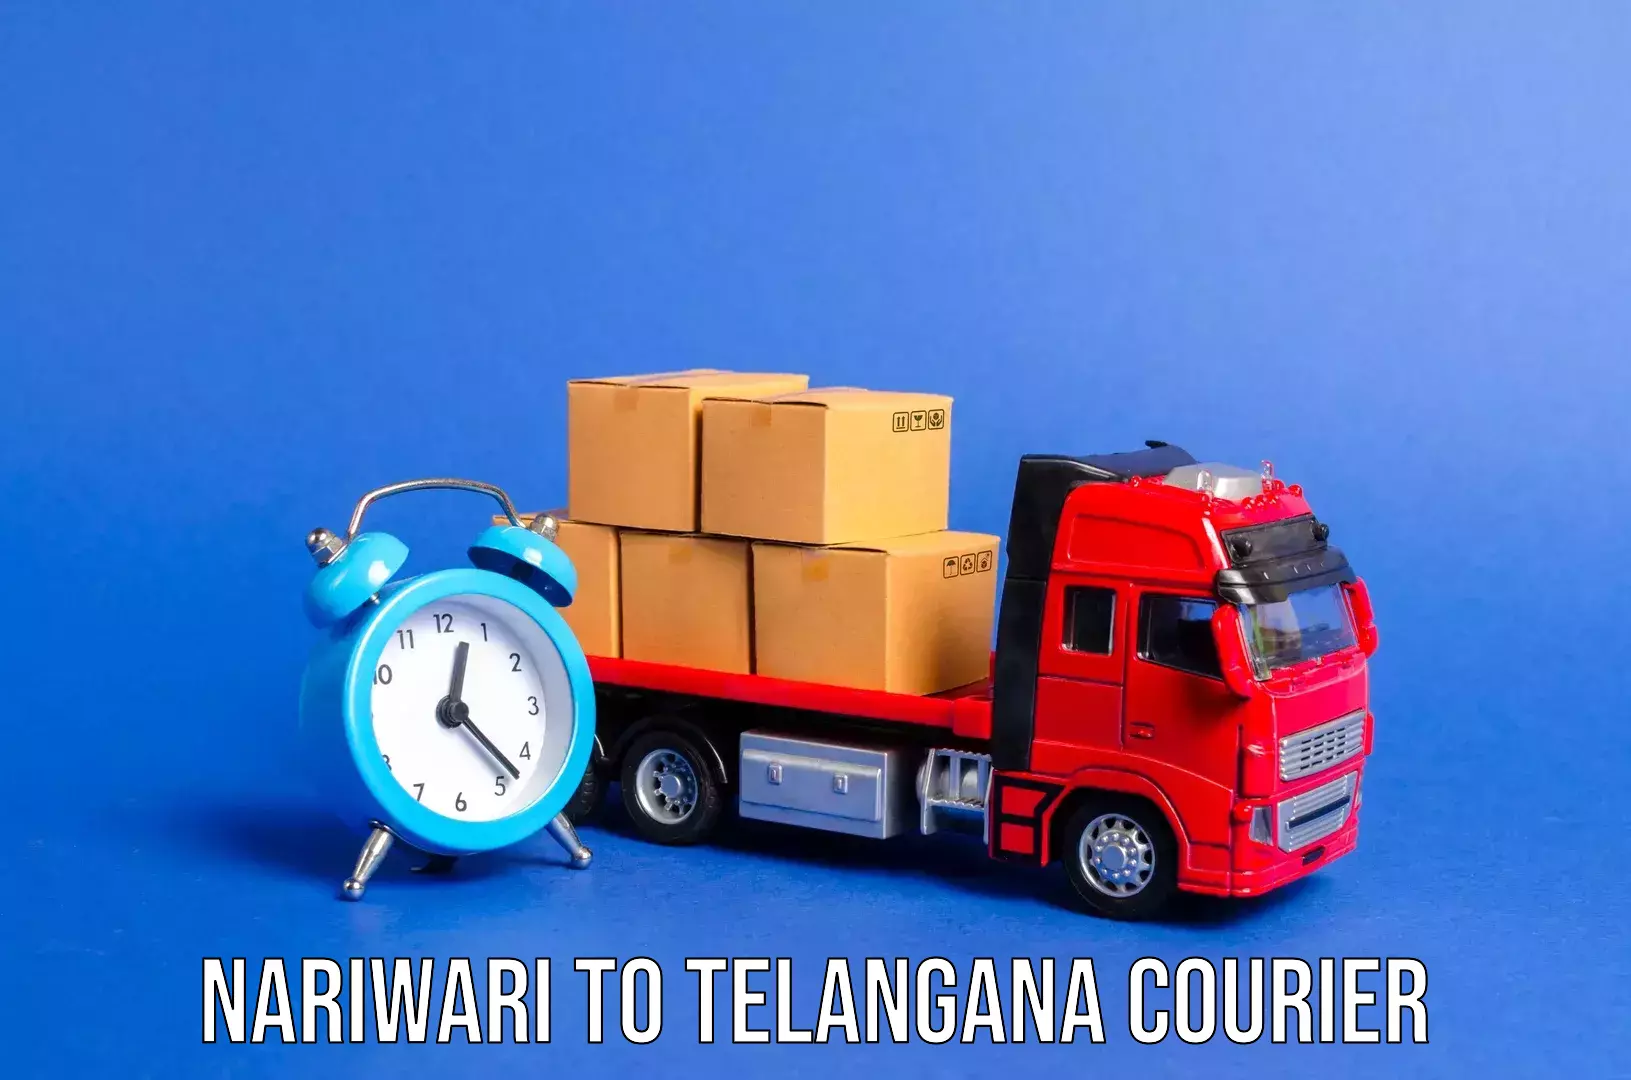 Luggage delivery network Nariwari to Hyderabad